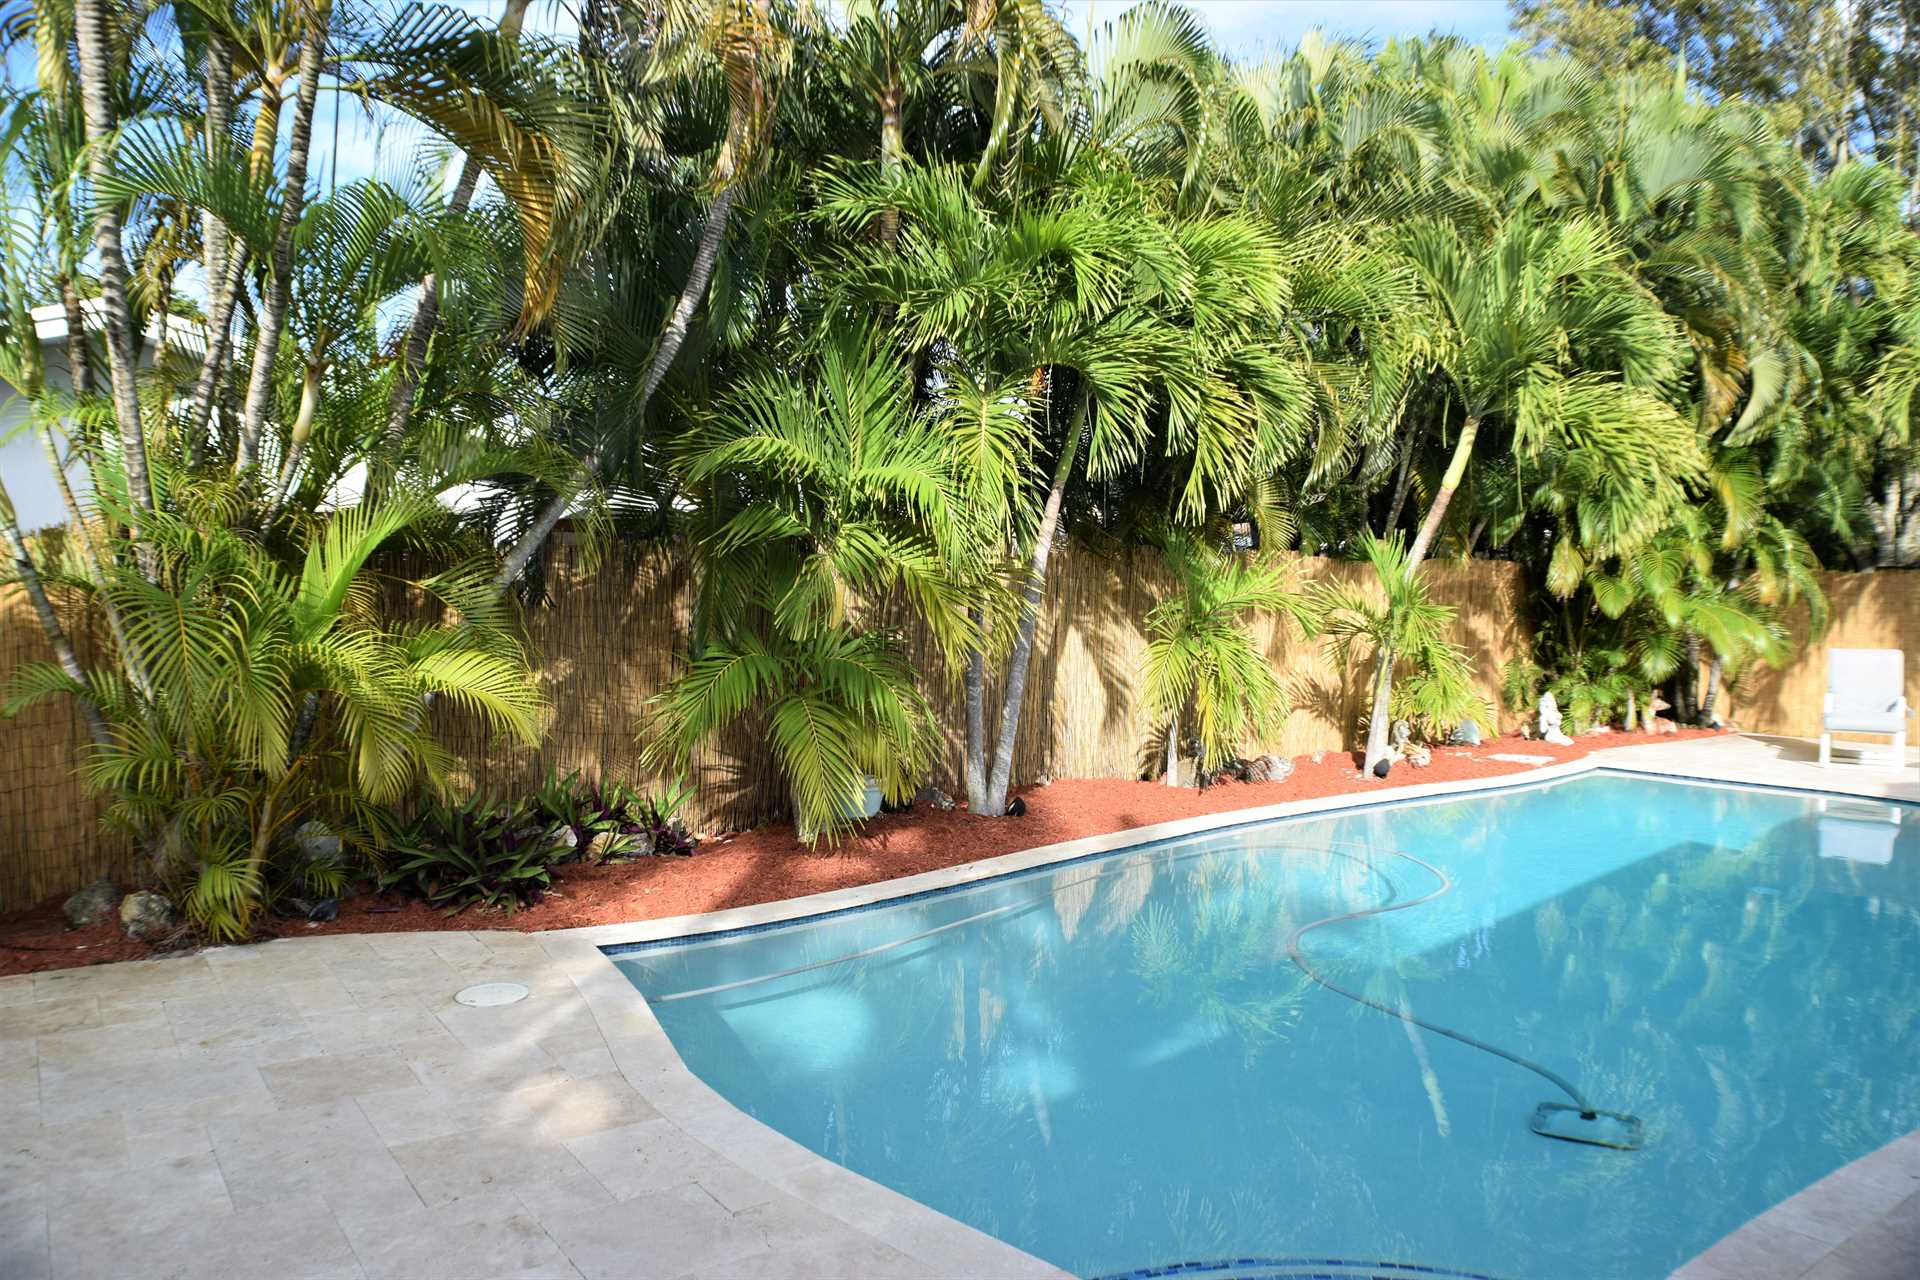 Pool deck is surrounded by six foot privacy fence and lush f